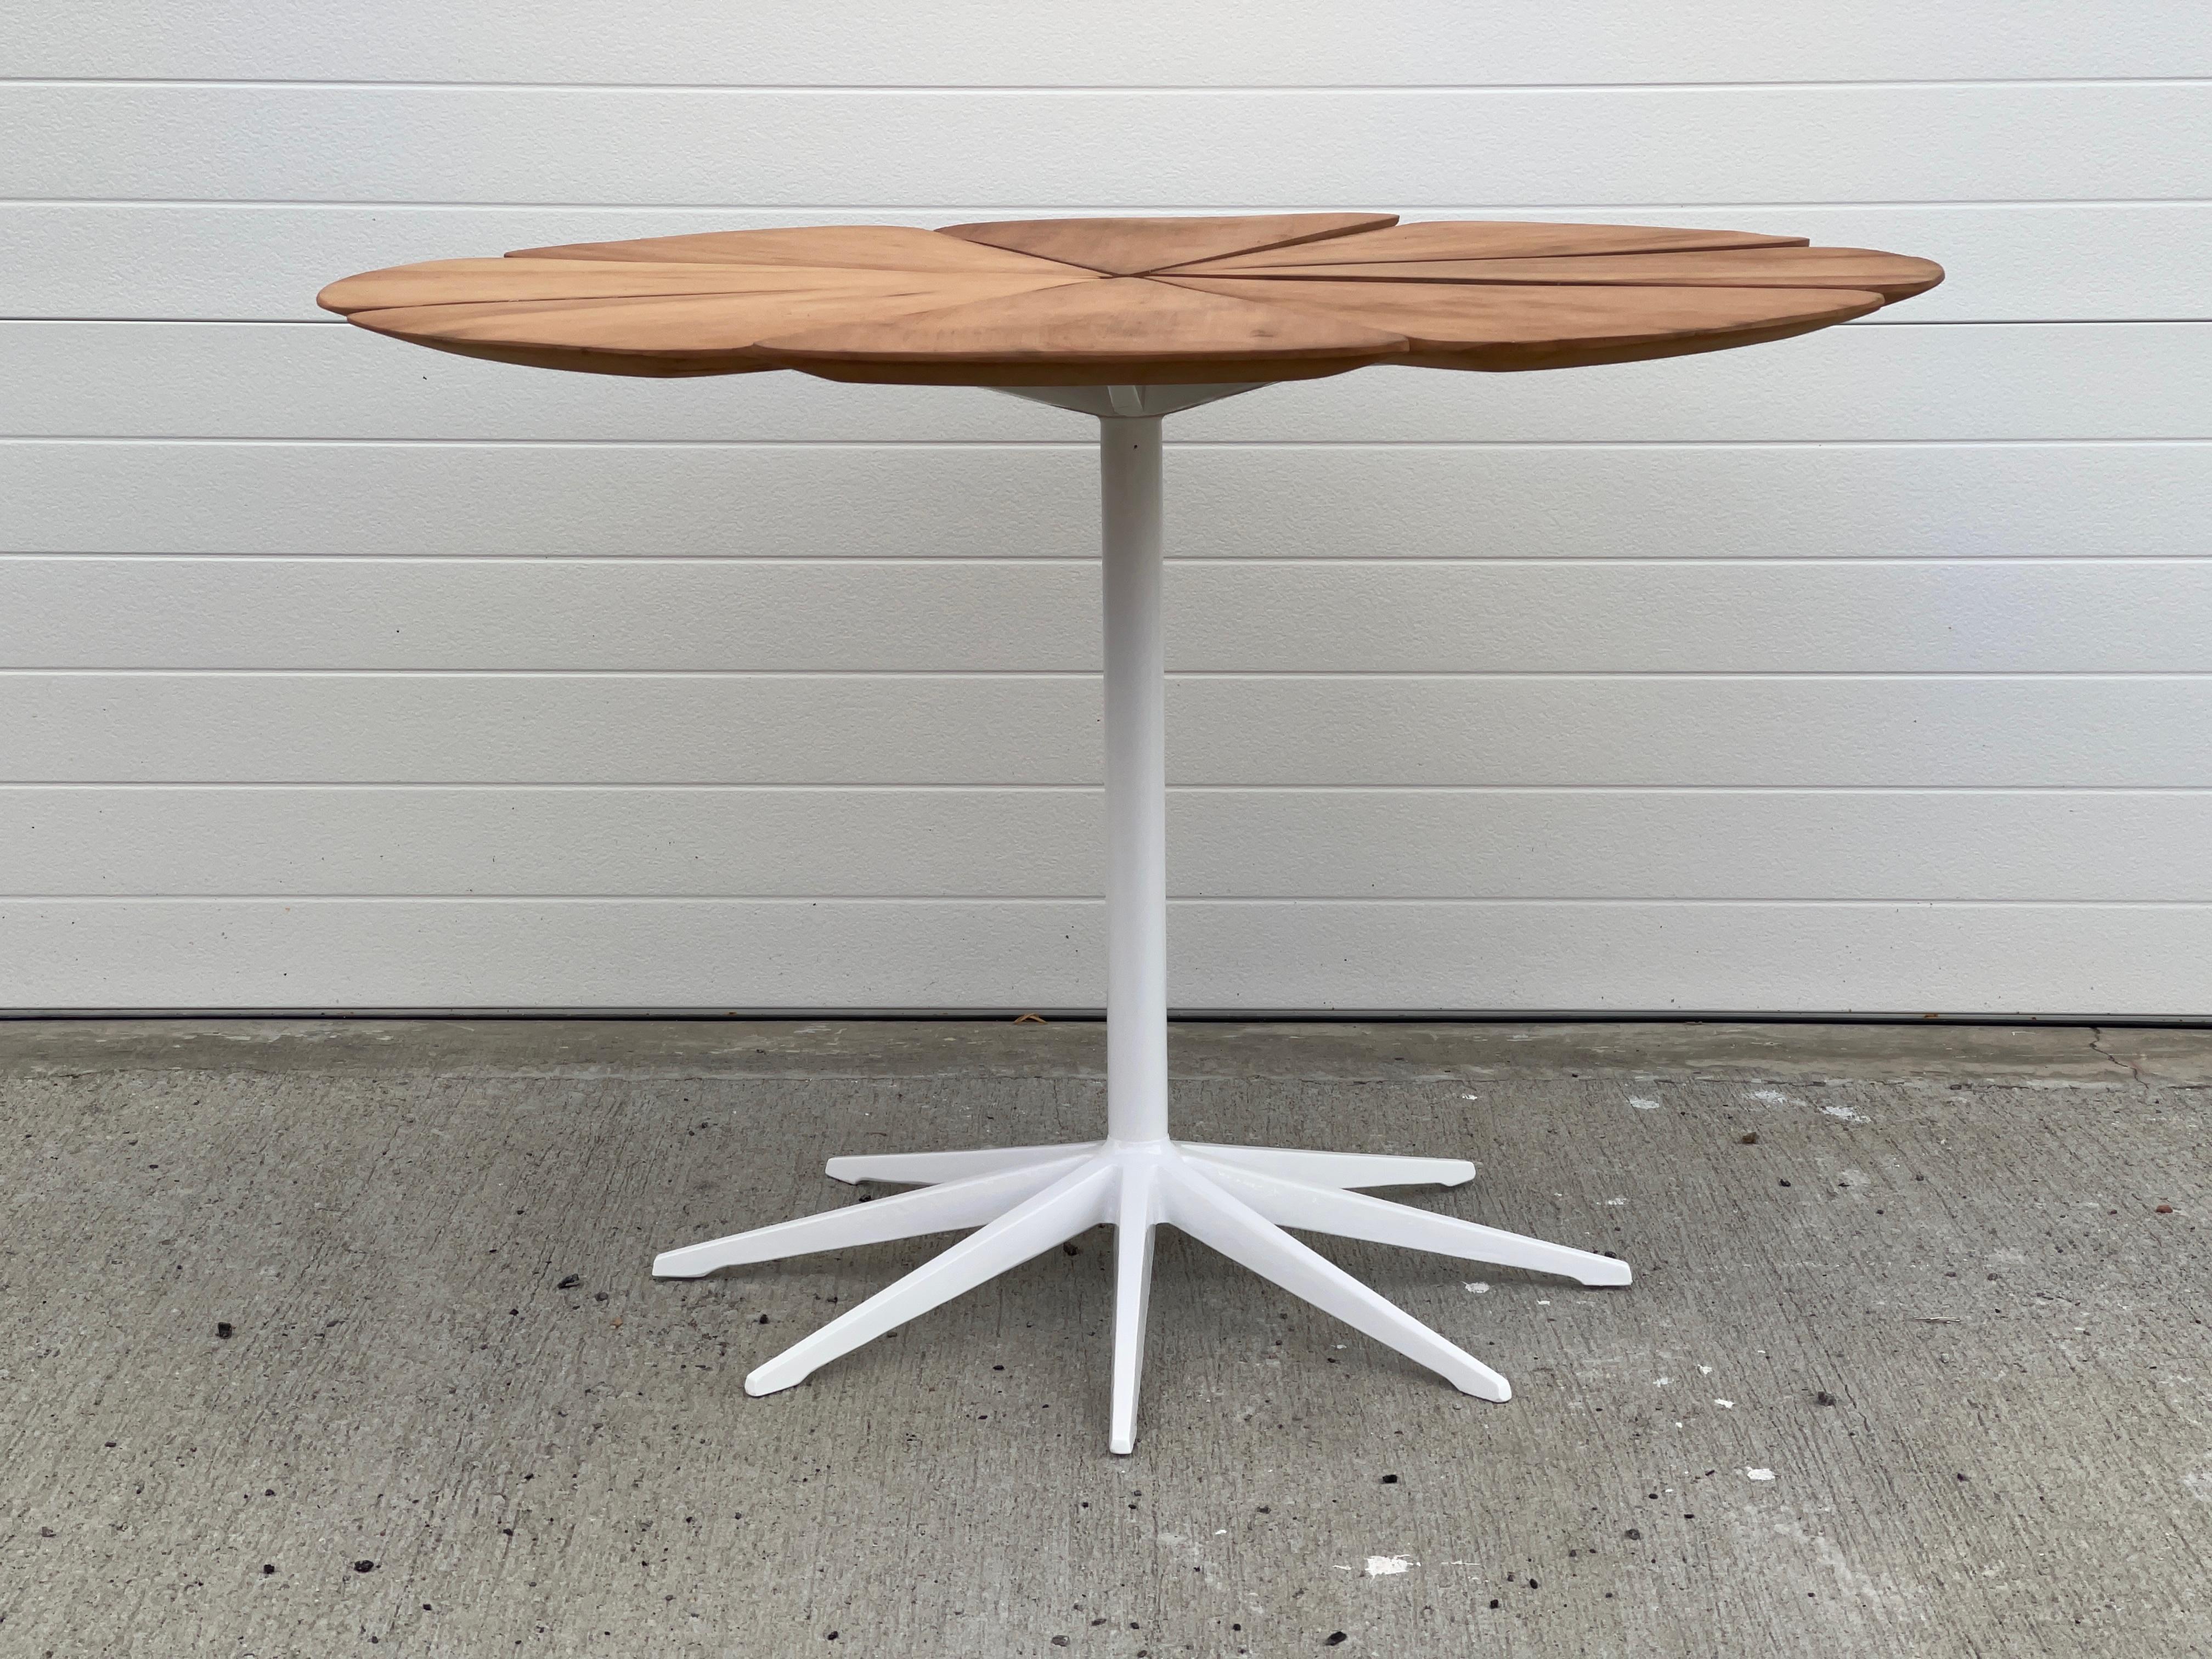 Mid-Century Modern 1961 Petal Dining Table by Richard Schultz for Knoll in California Redwood For Sale